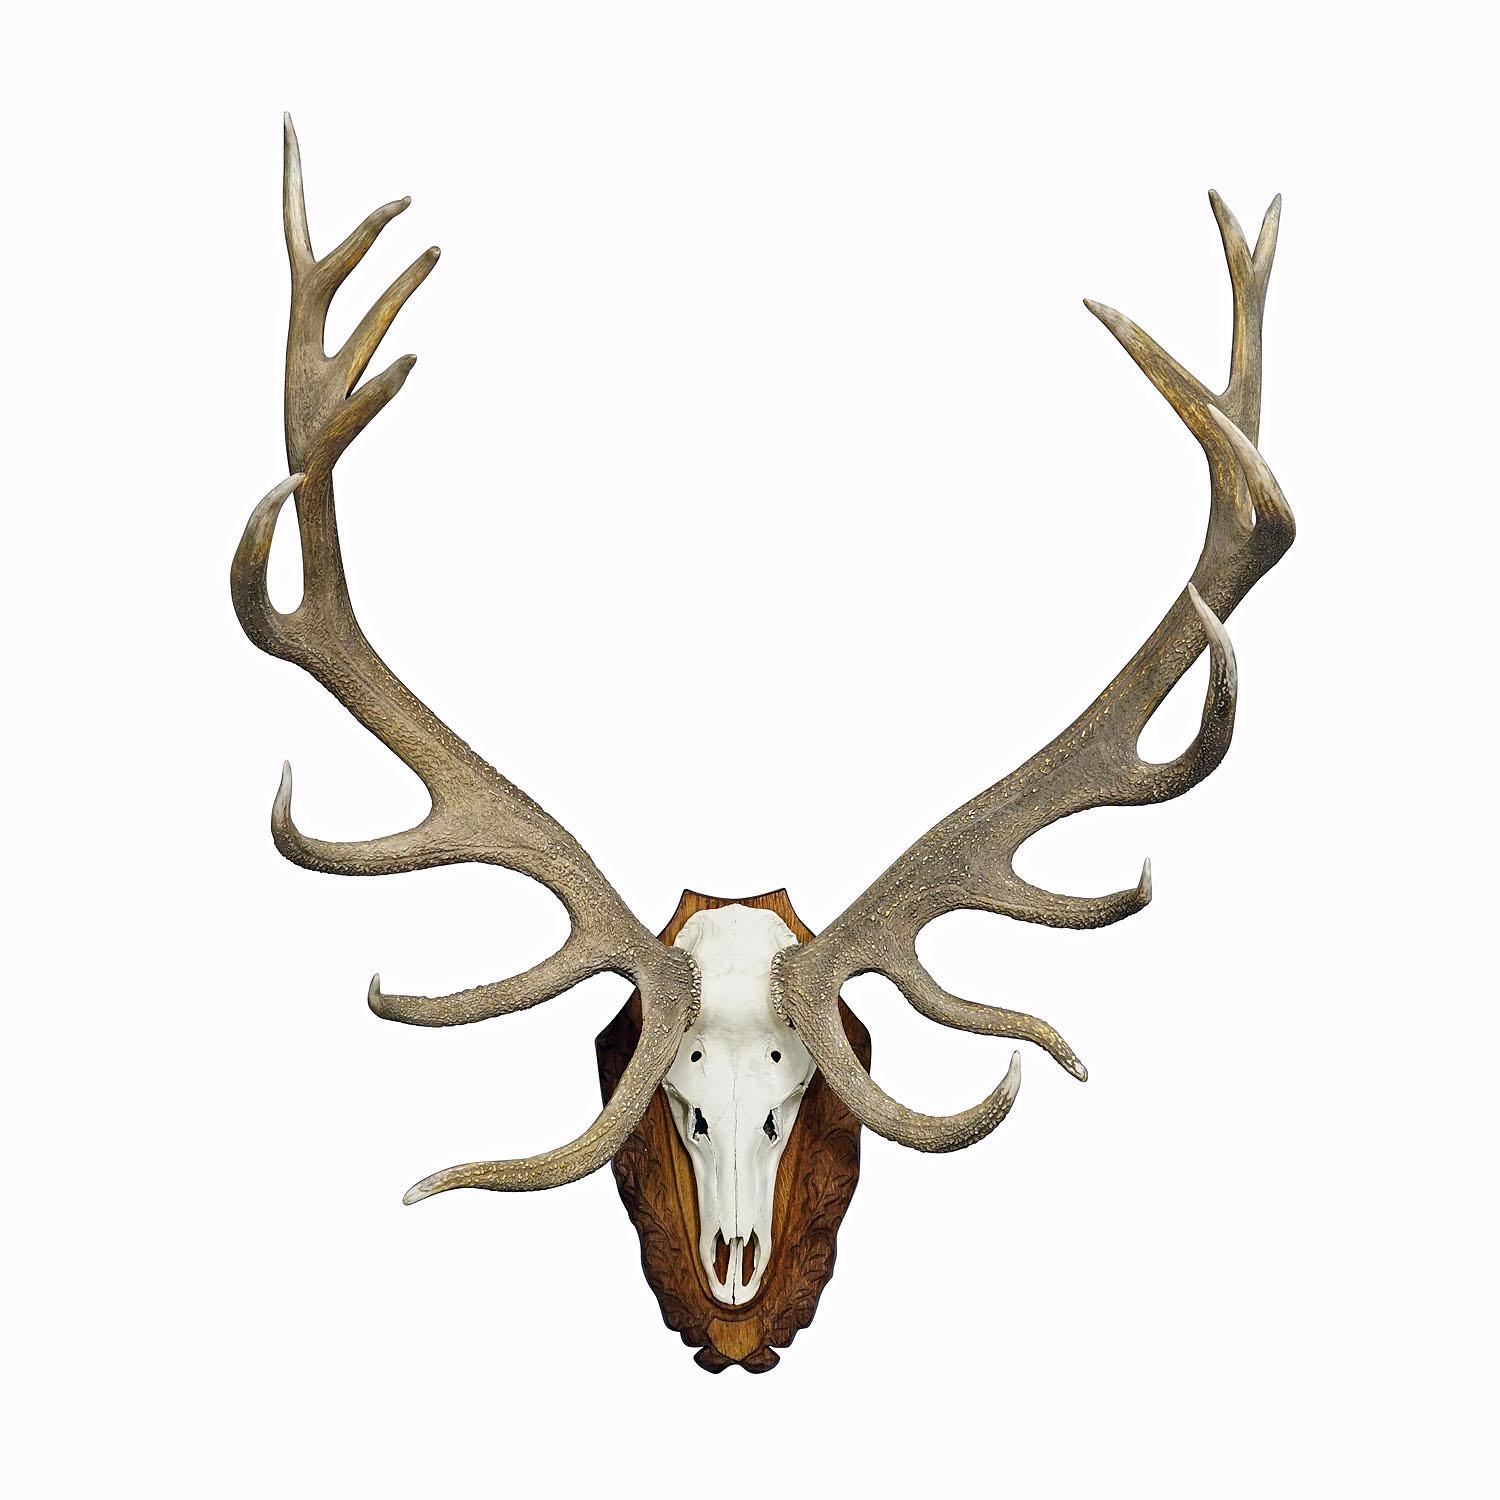 Capital Black Forest 16 Pointer Deer Trophy on Wooden Plaque

A very large 16 pointer deer (Cervus elaphus) trophy from the Black Forest. The trophy was shot around 1950s. The large antlers are mounted on a carved oak wood plaque. Weight 20.7 pound